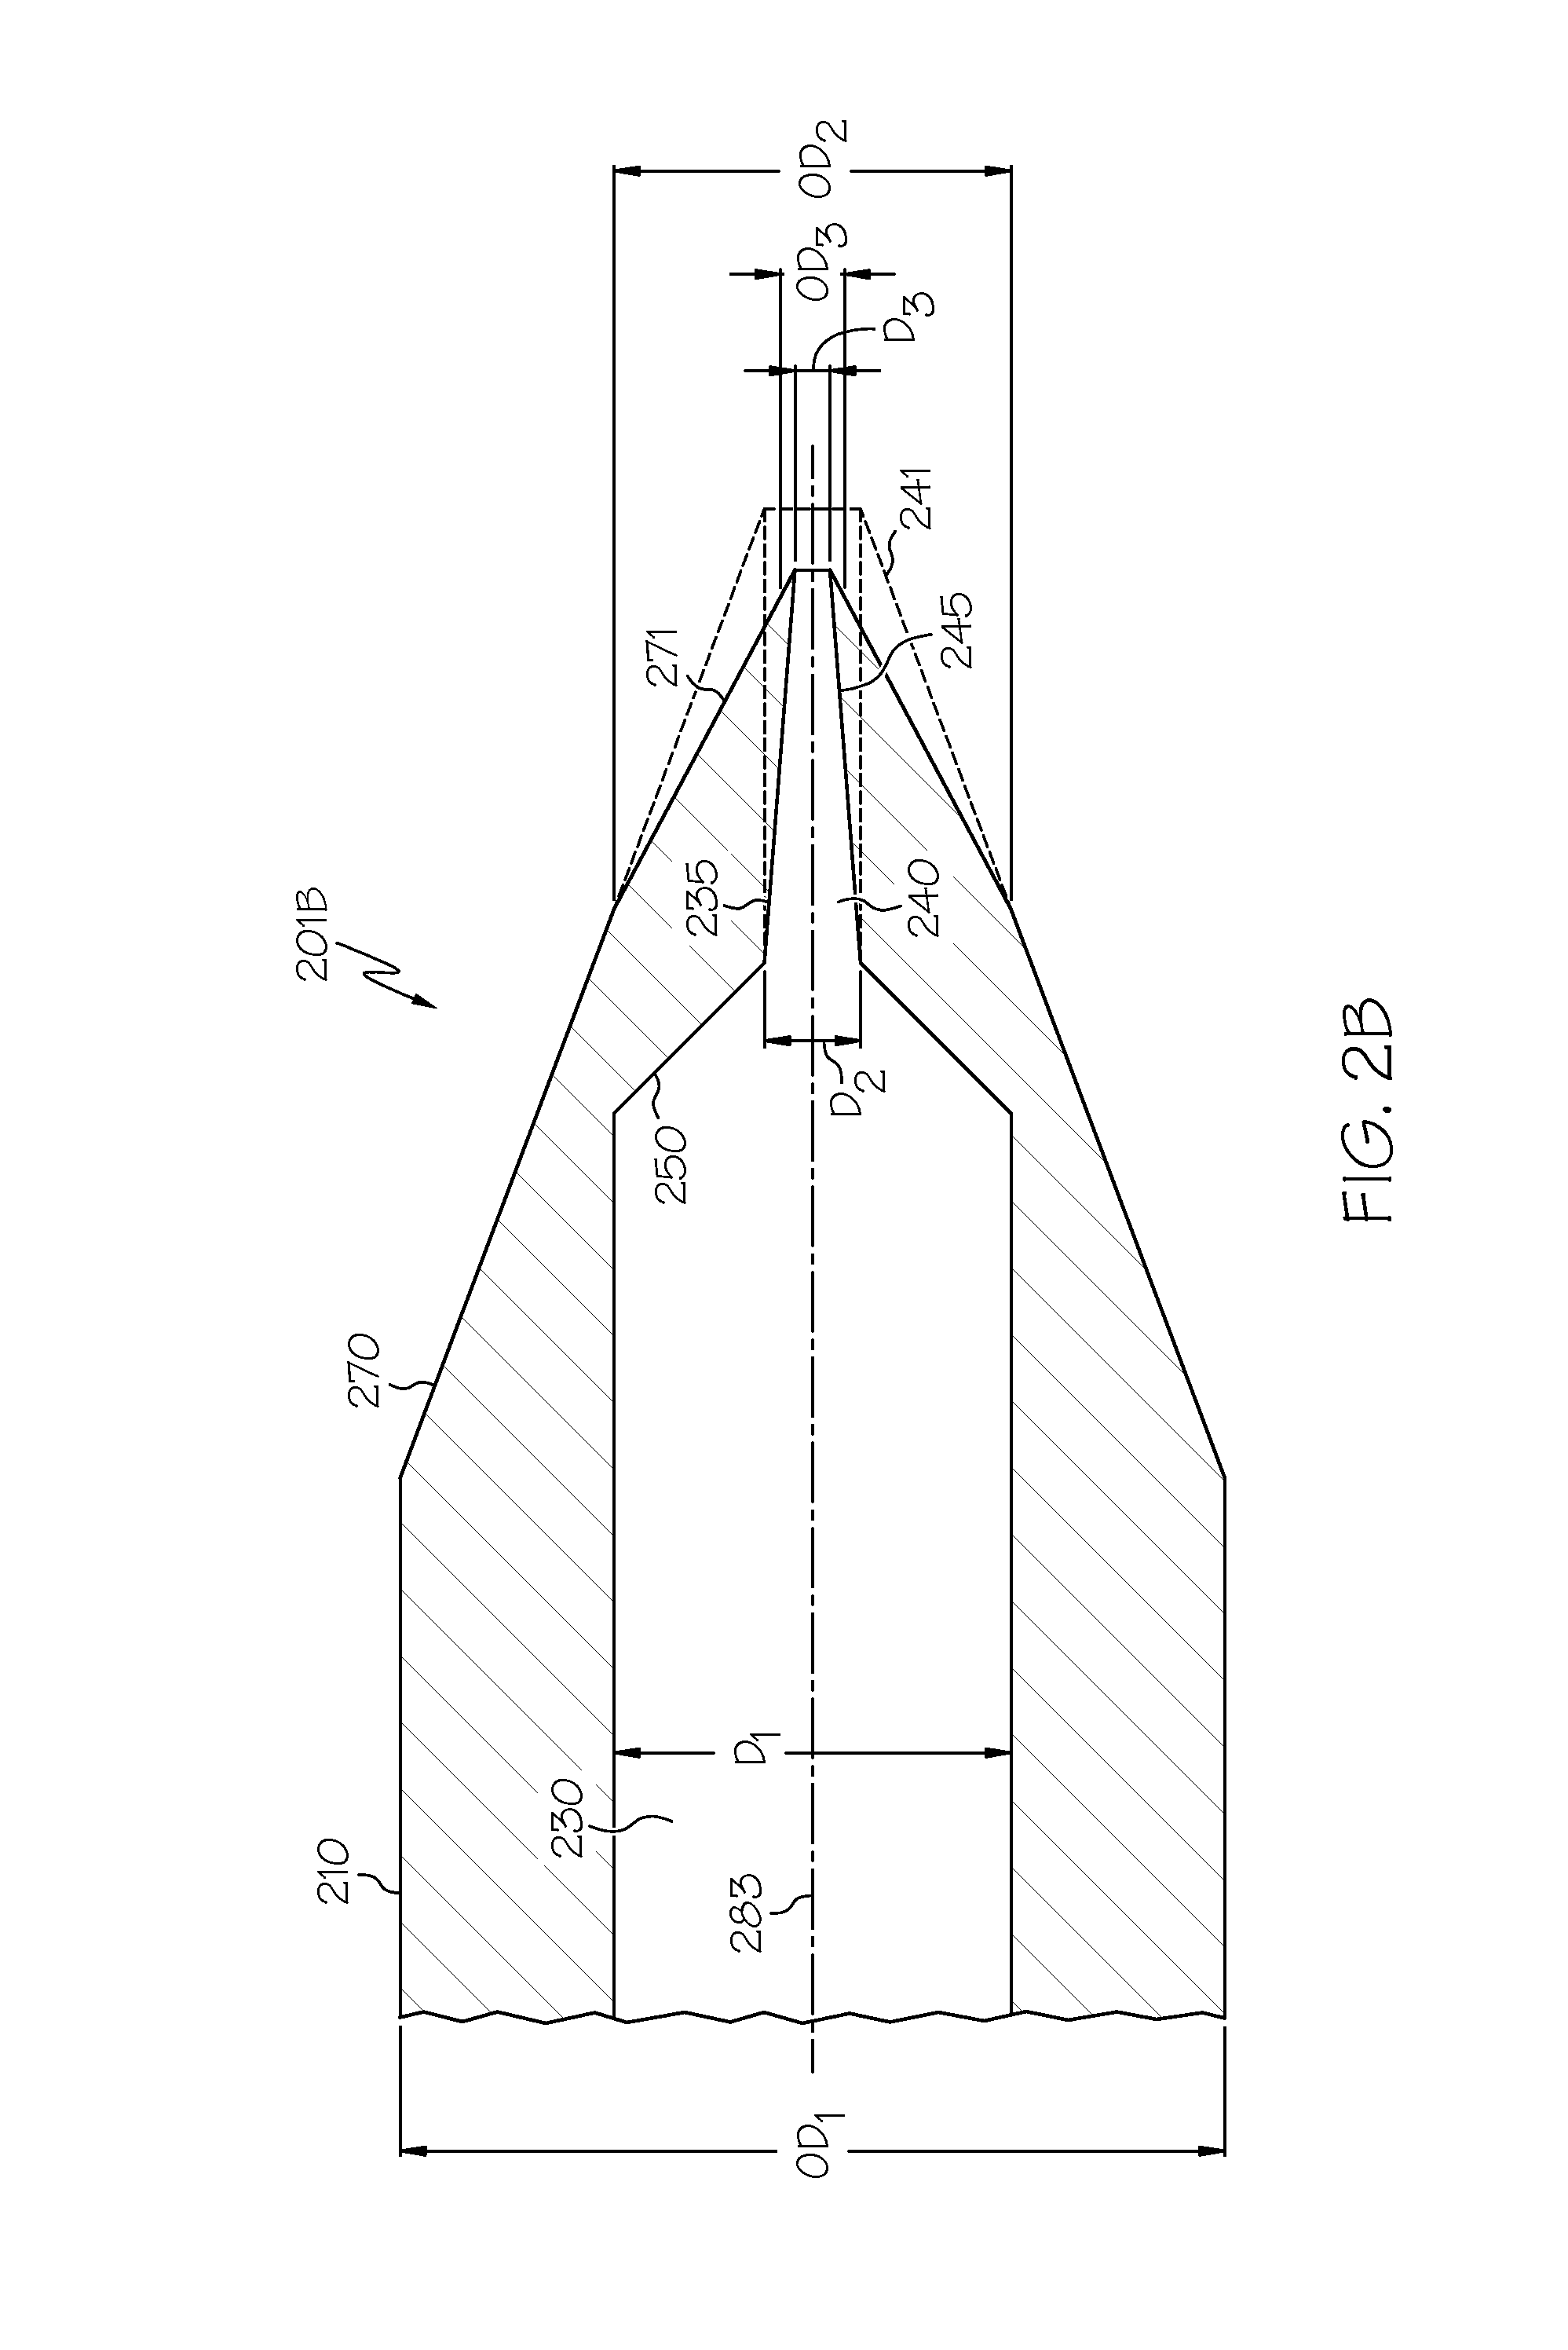 Method for manufacturing a material dispense tip